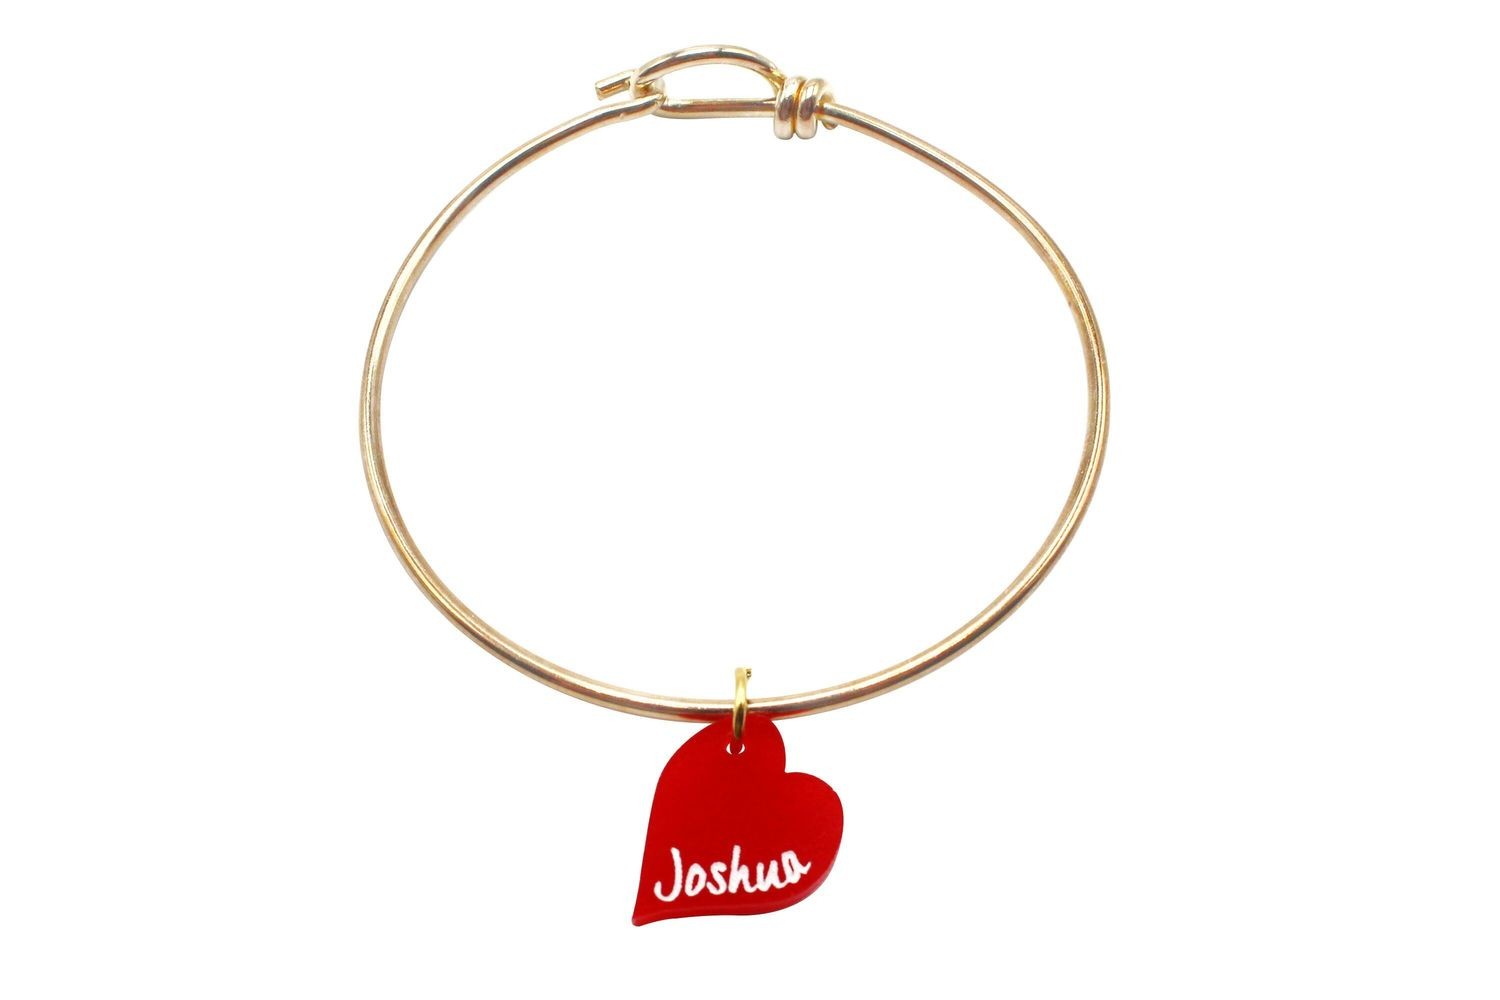 Heart Shaped Charm with Name on Decorative Wire Bracelet